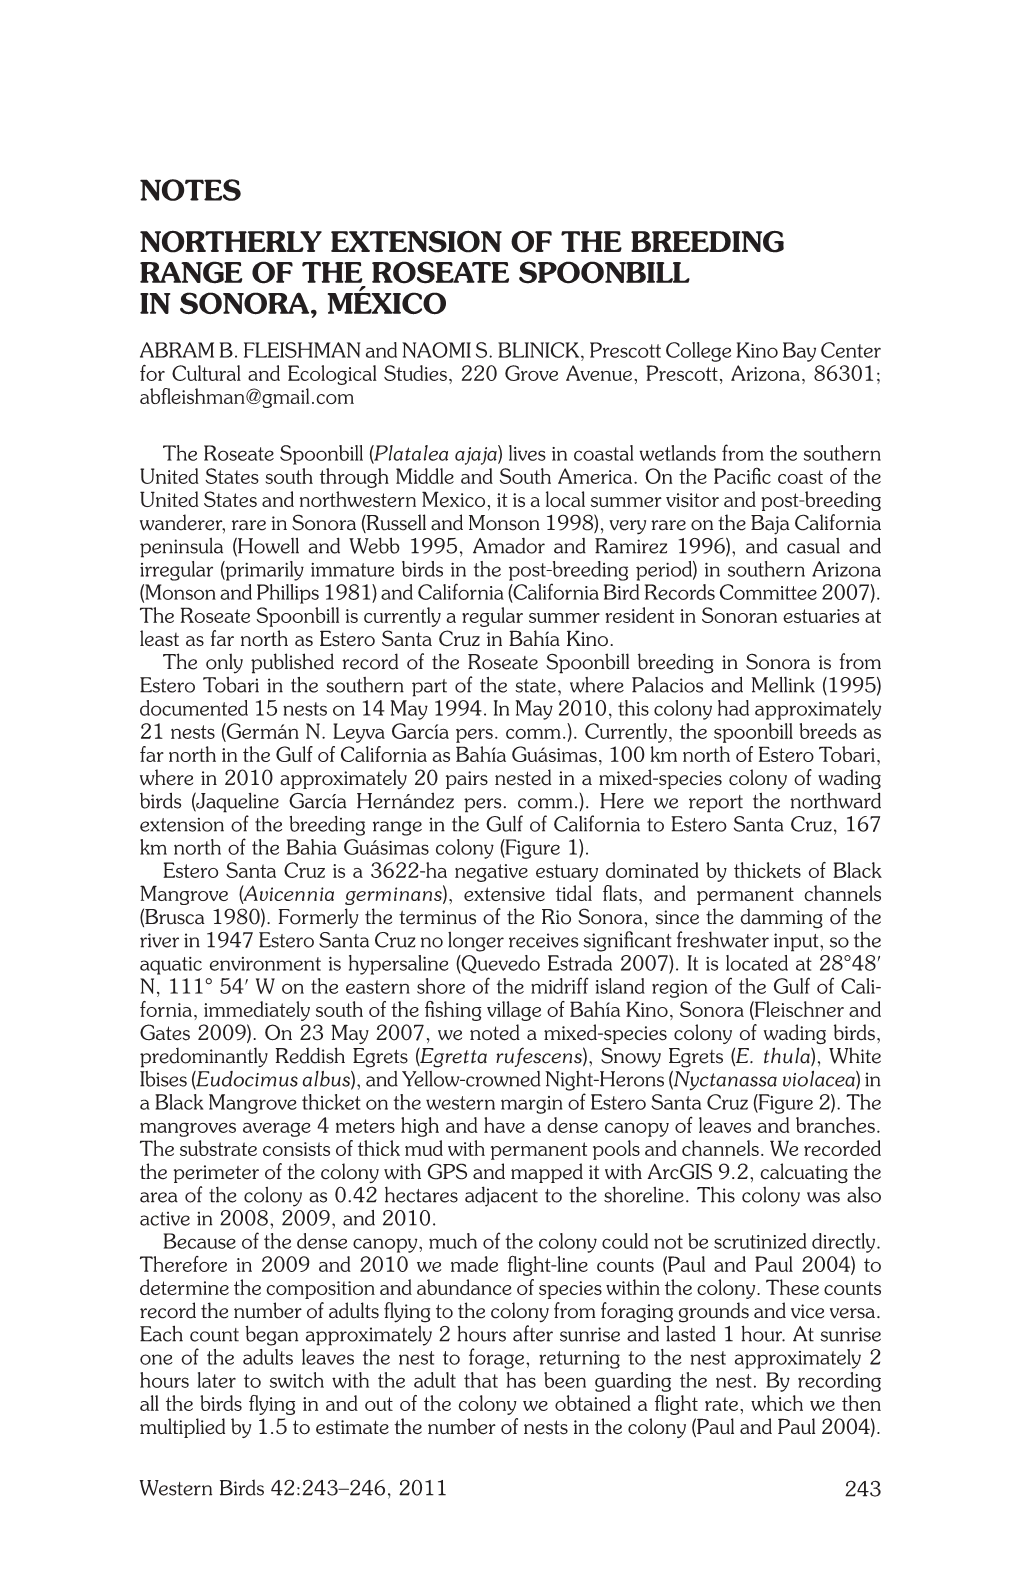 NORTHERLY EXTENSION of the BREEDING RANGE of the ROSEATE SPOONBILL in SONORA, MÉXICO Abram B